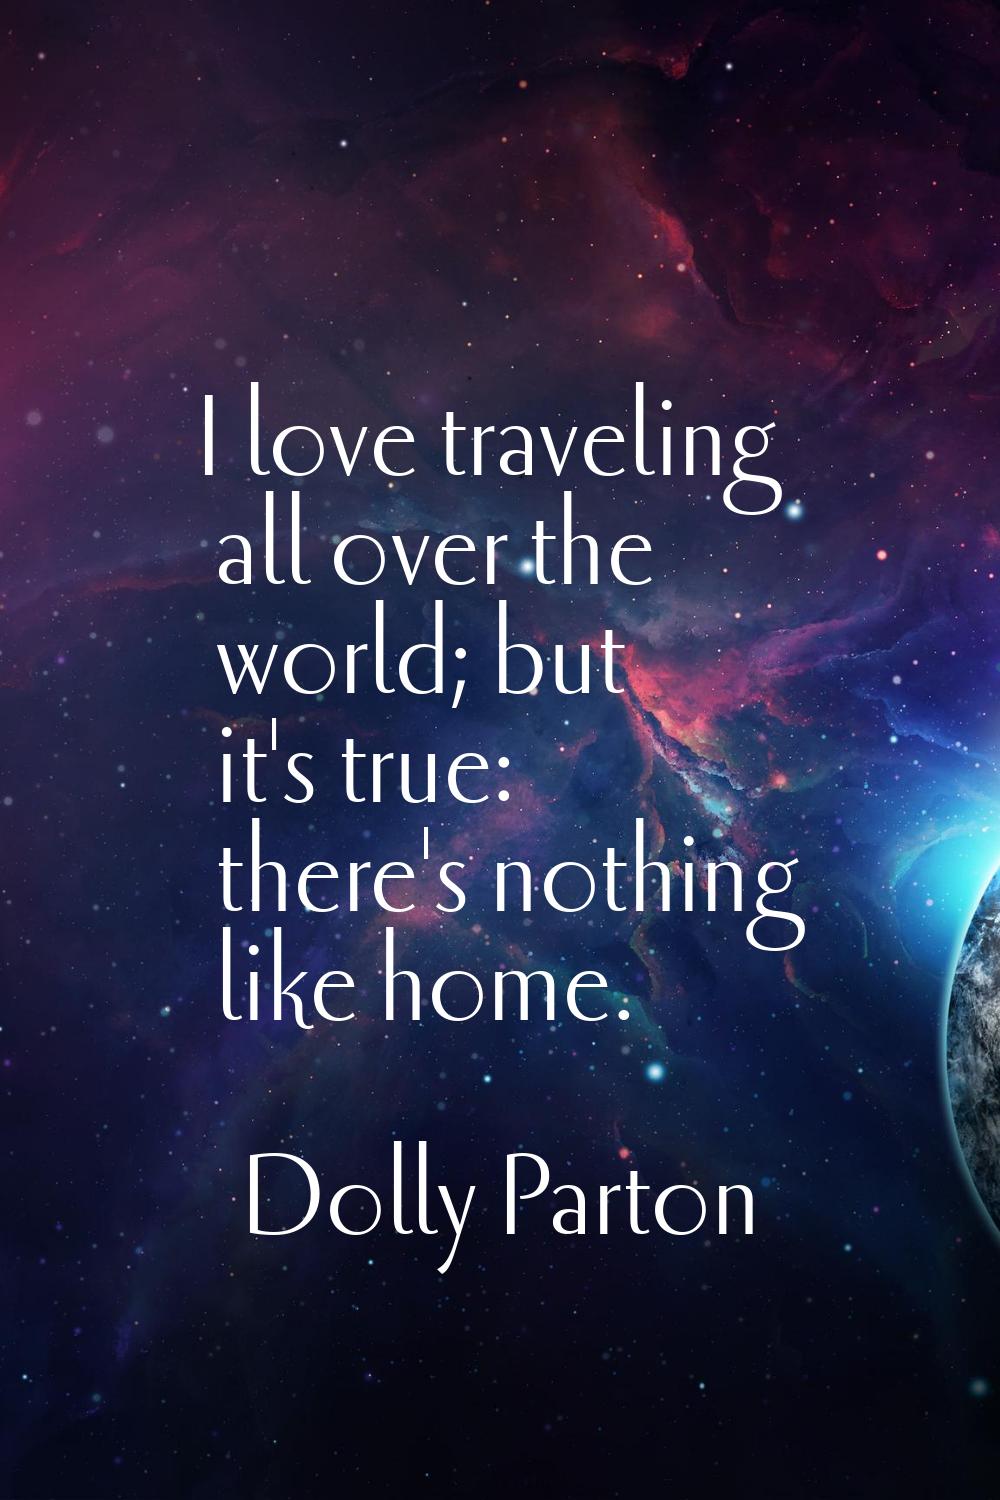 I love traveling all over the world; but it's true: there's nothing like home.